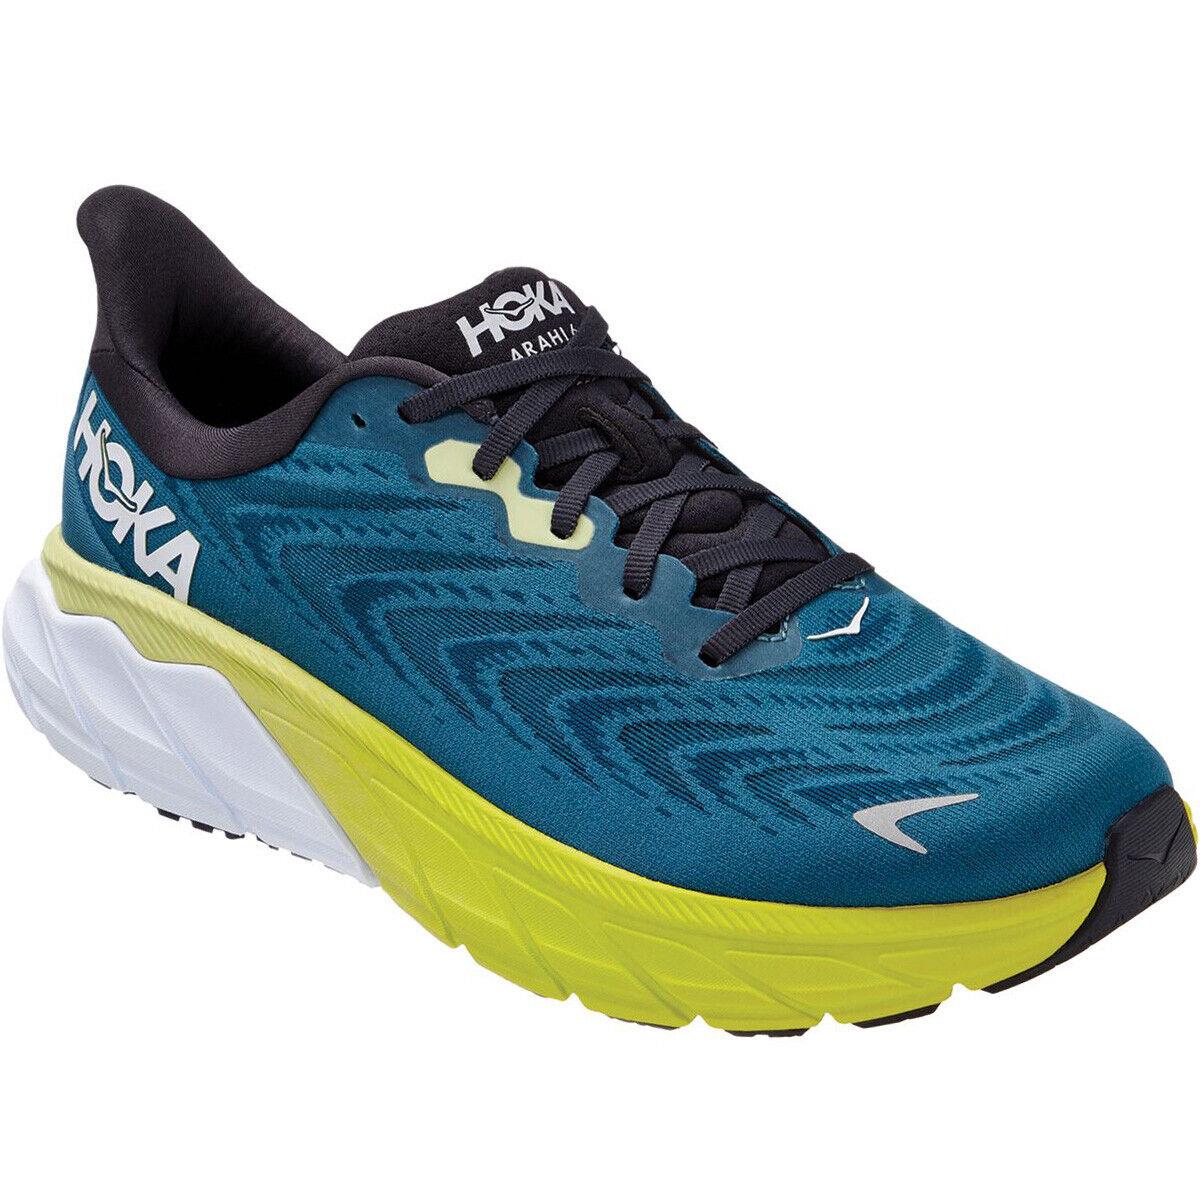 Hoka One One Arahi 6 Men`s Running Shoes All Colors US Sizes 7-14 Blue Graphite/Blue Coral